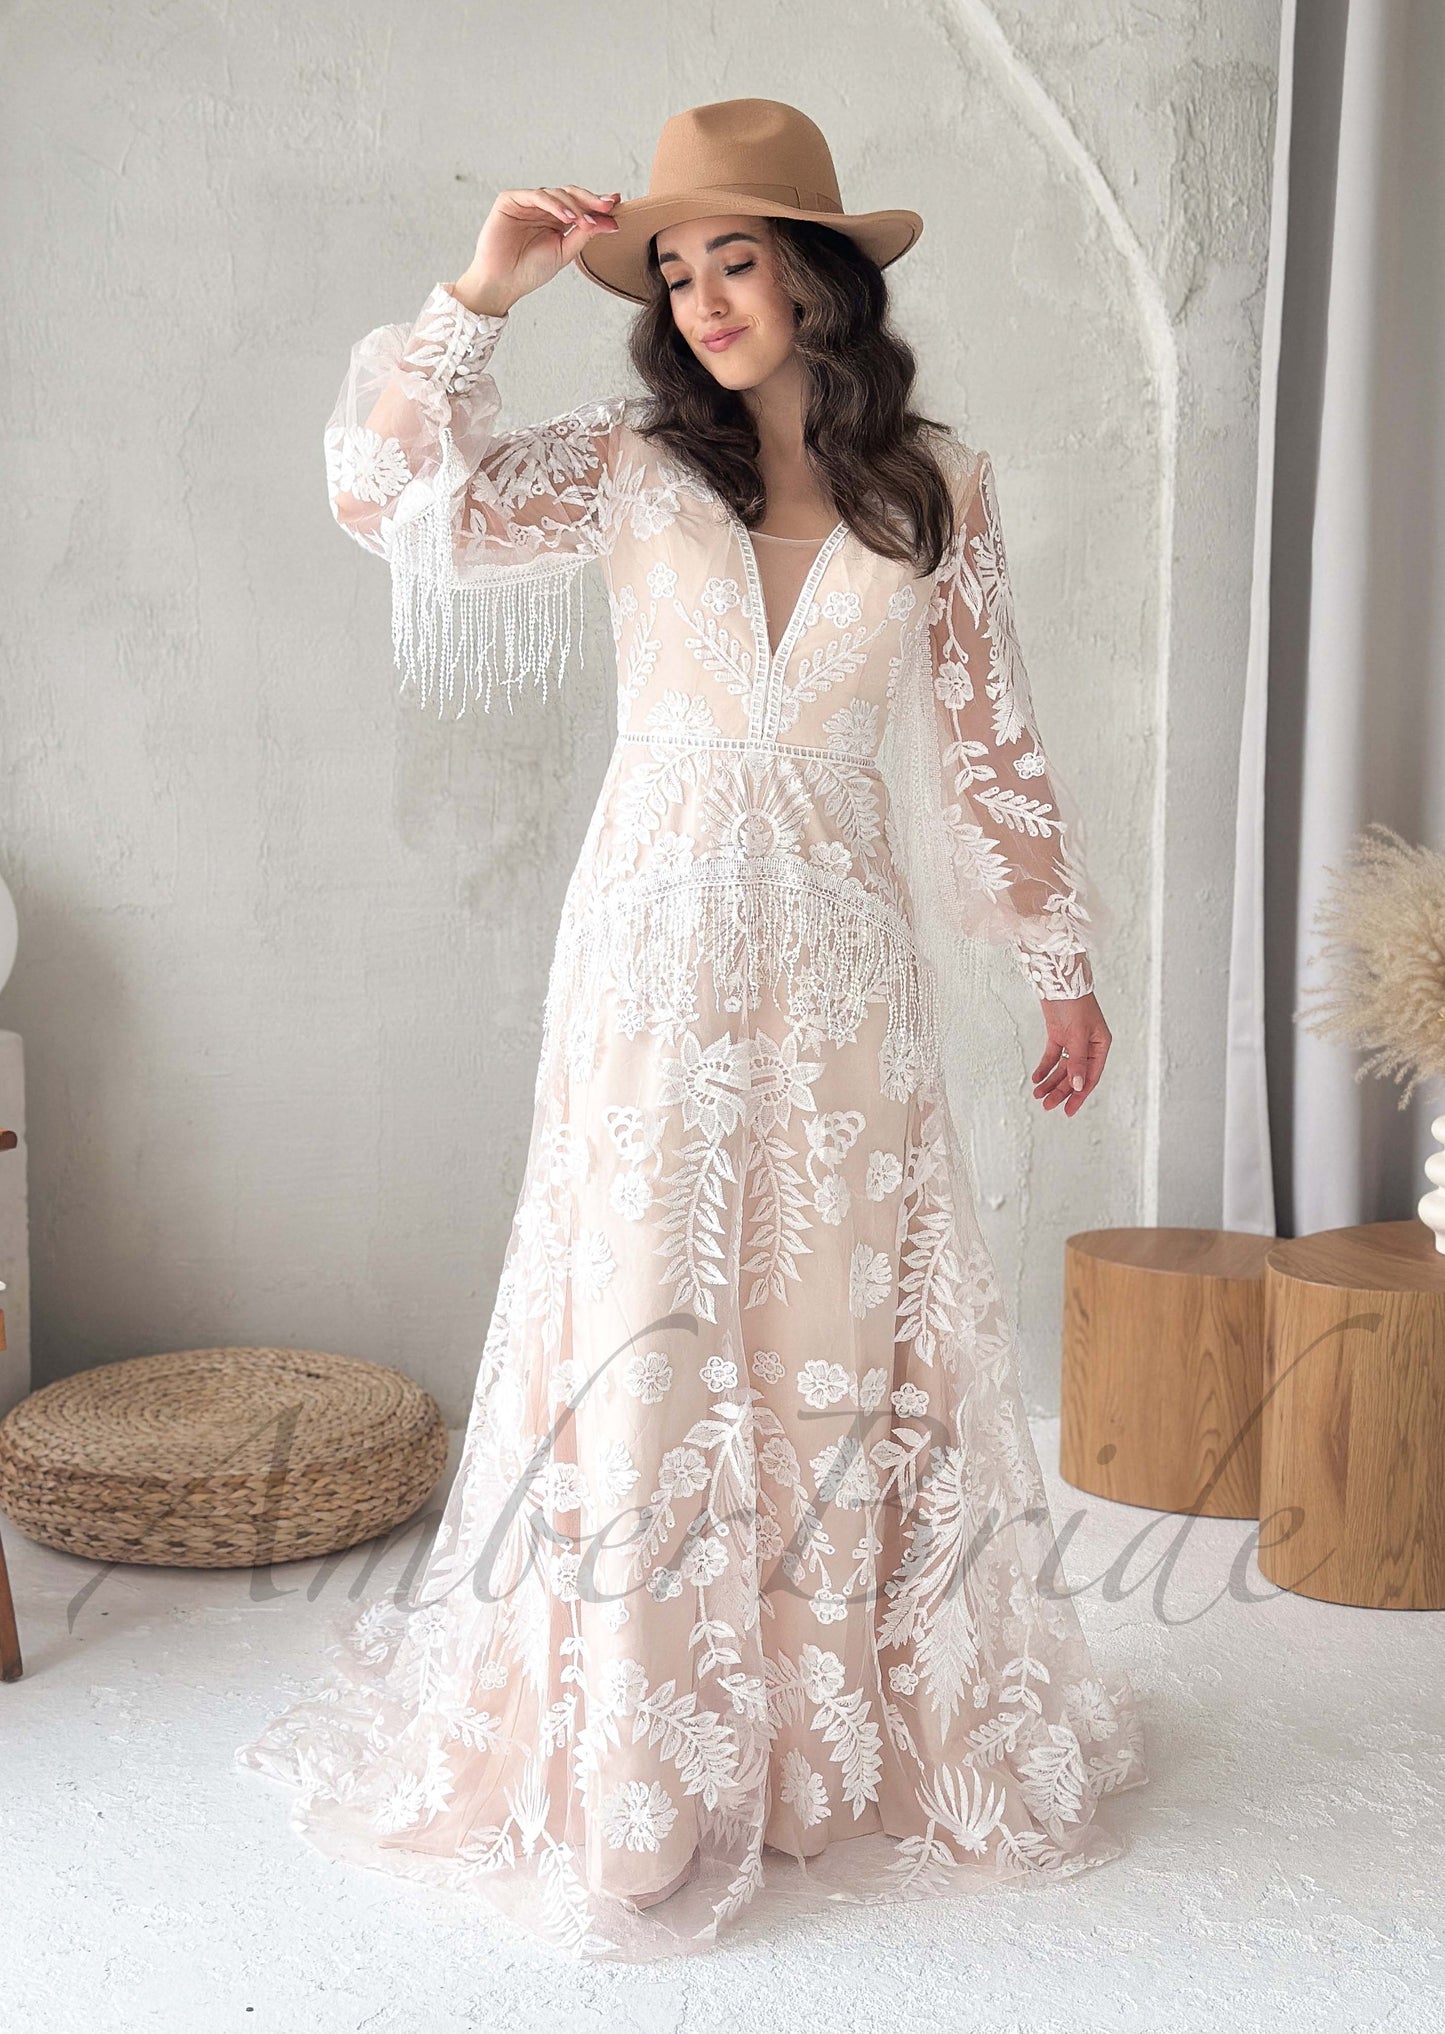 Boho A Line Wedding Dress with Lace Flower Appliques and Long Sleeve with Tassels